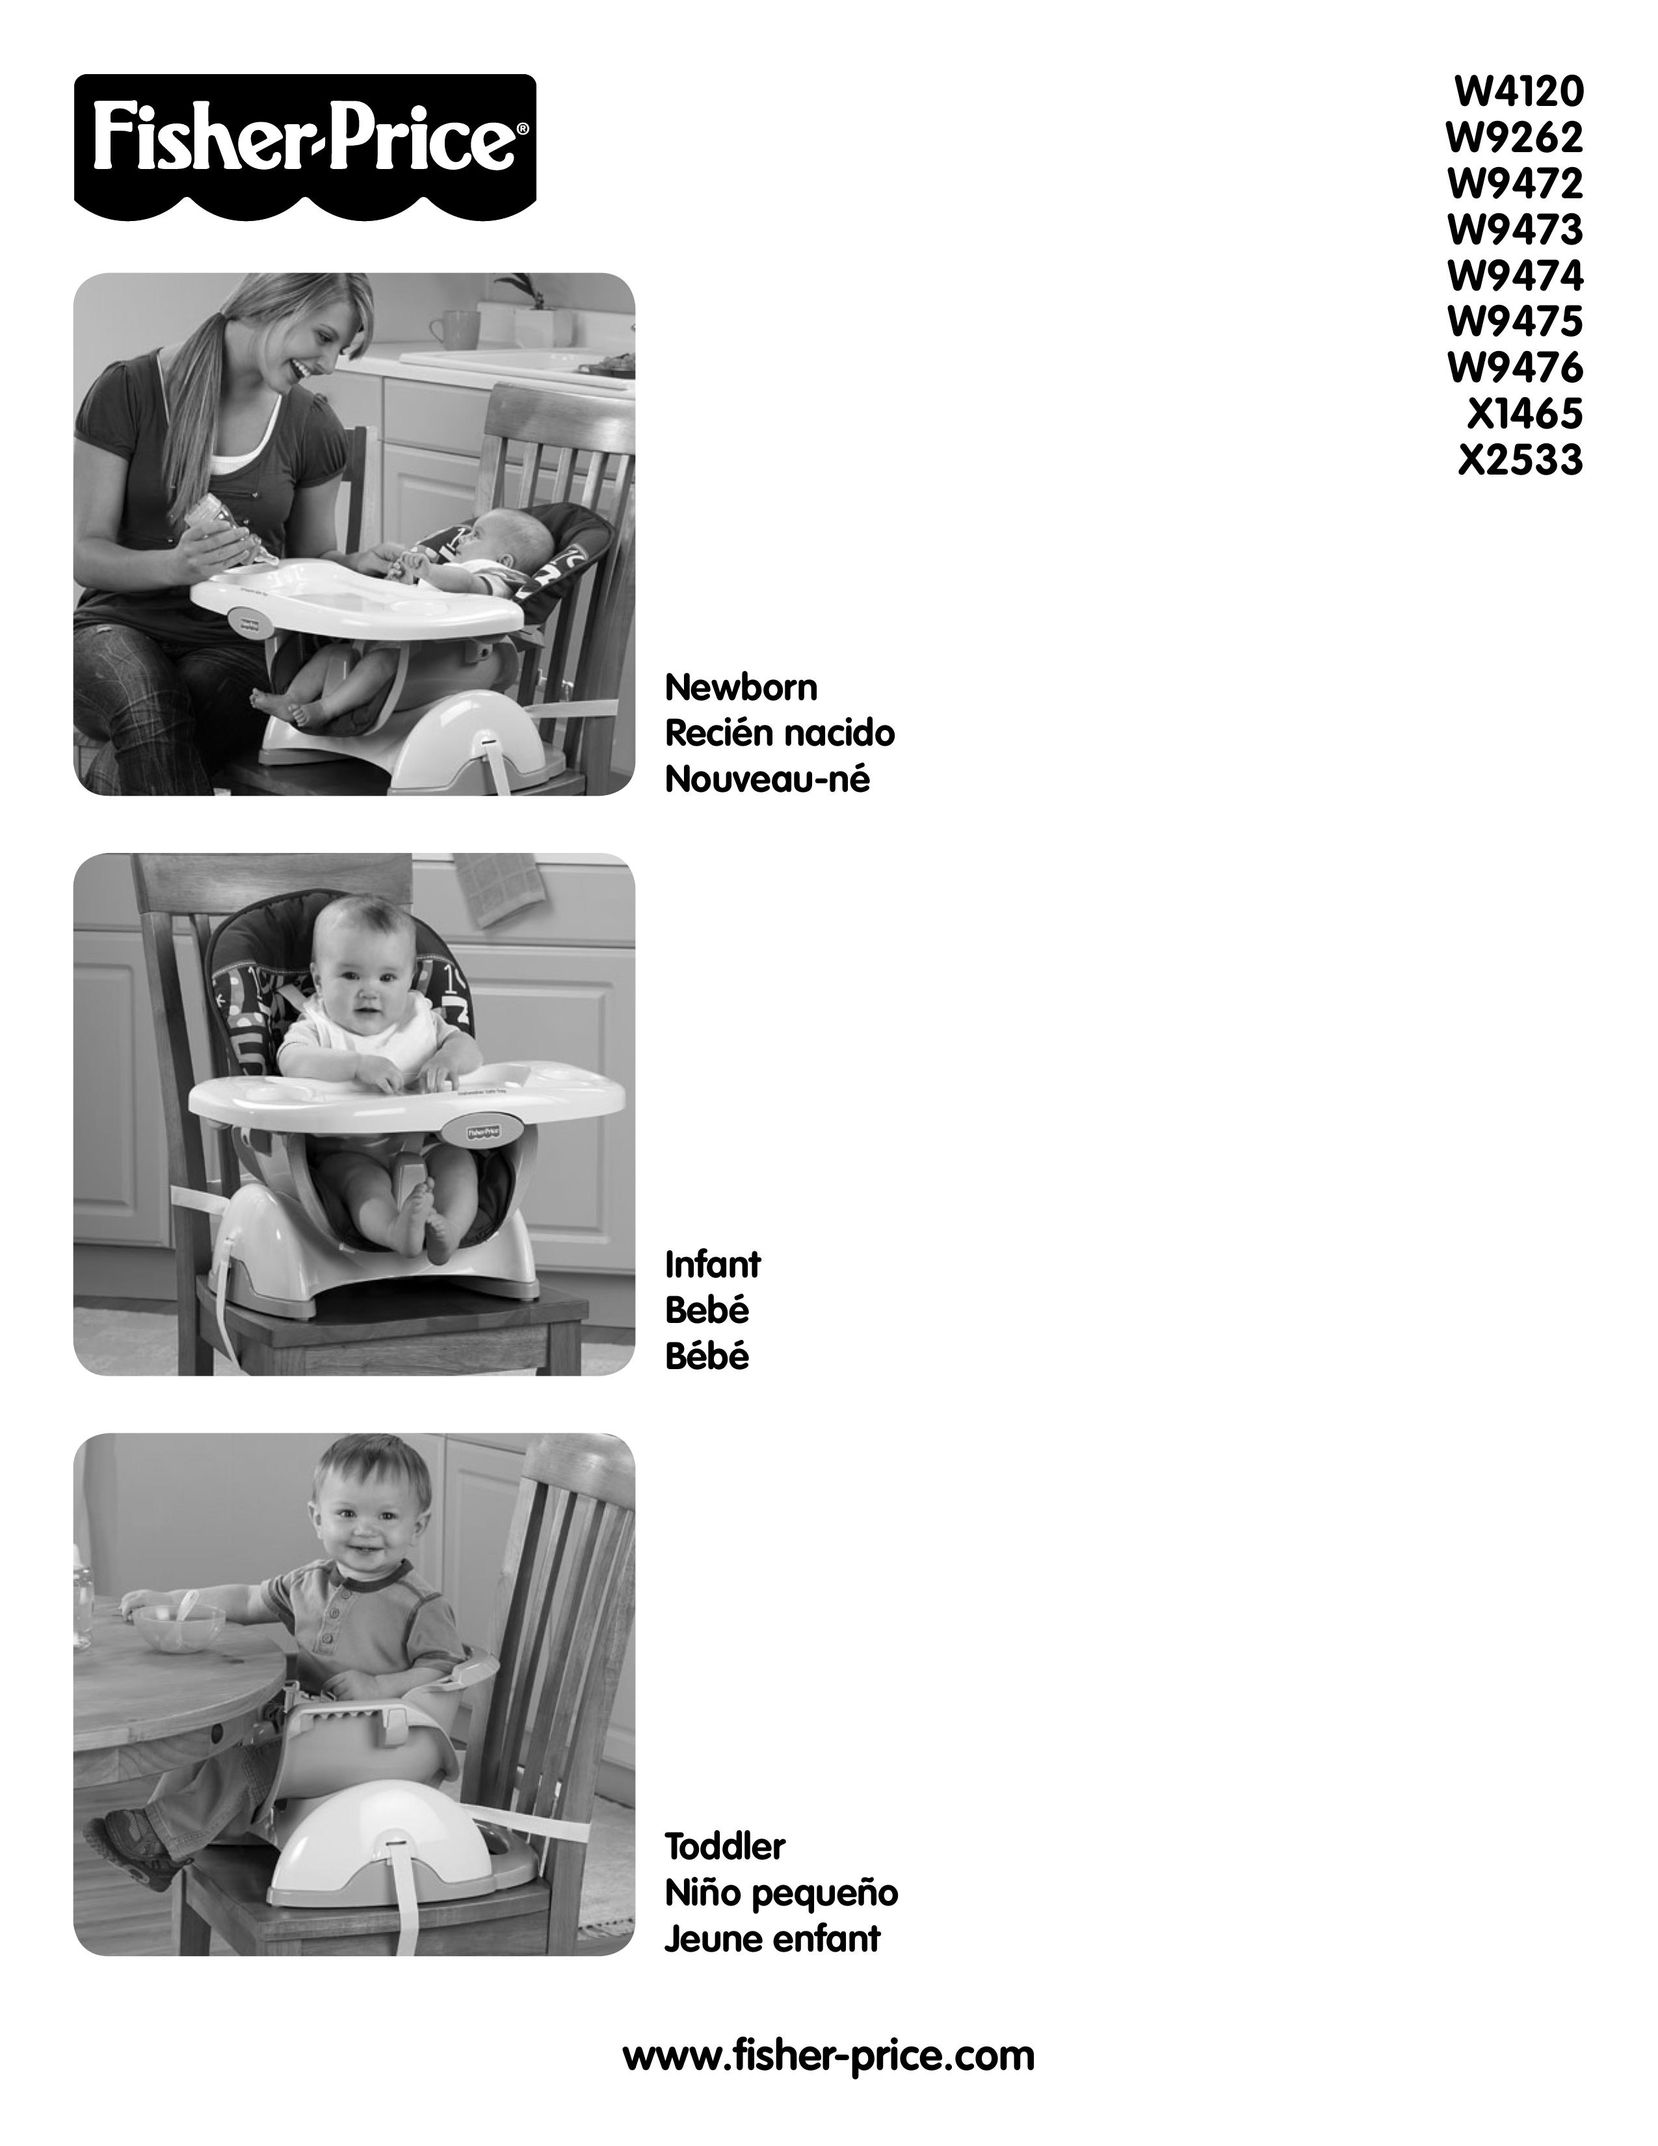 Fisher-Price X1465 High Chair User Manual